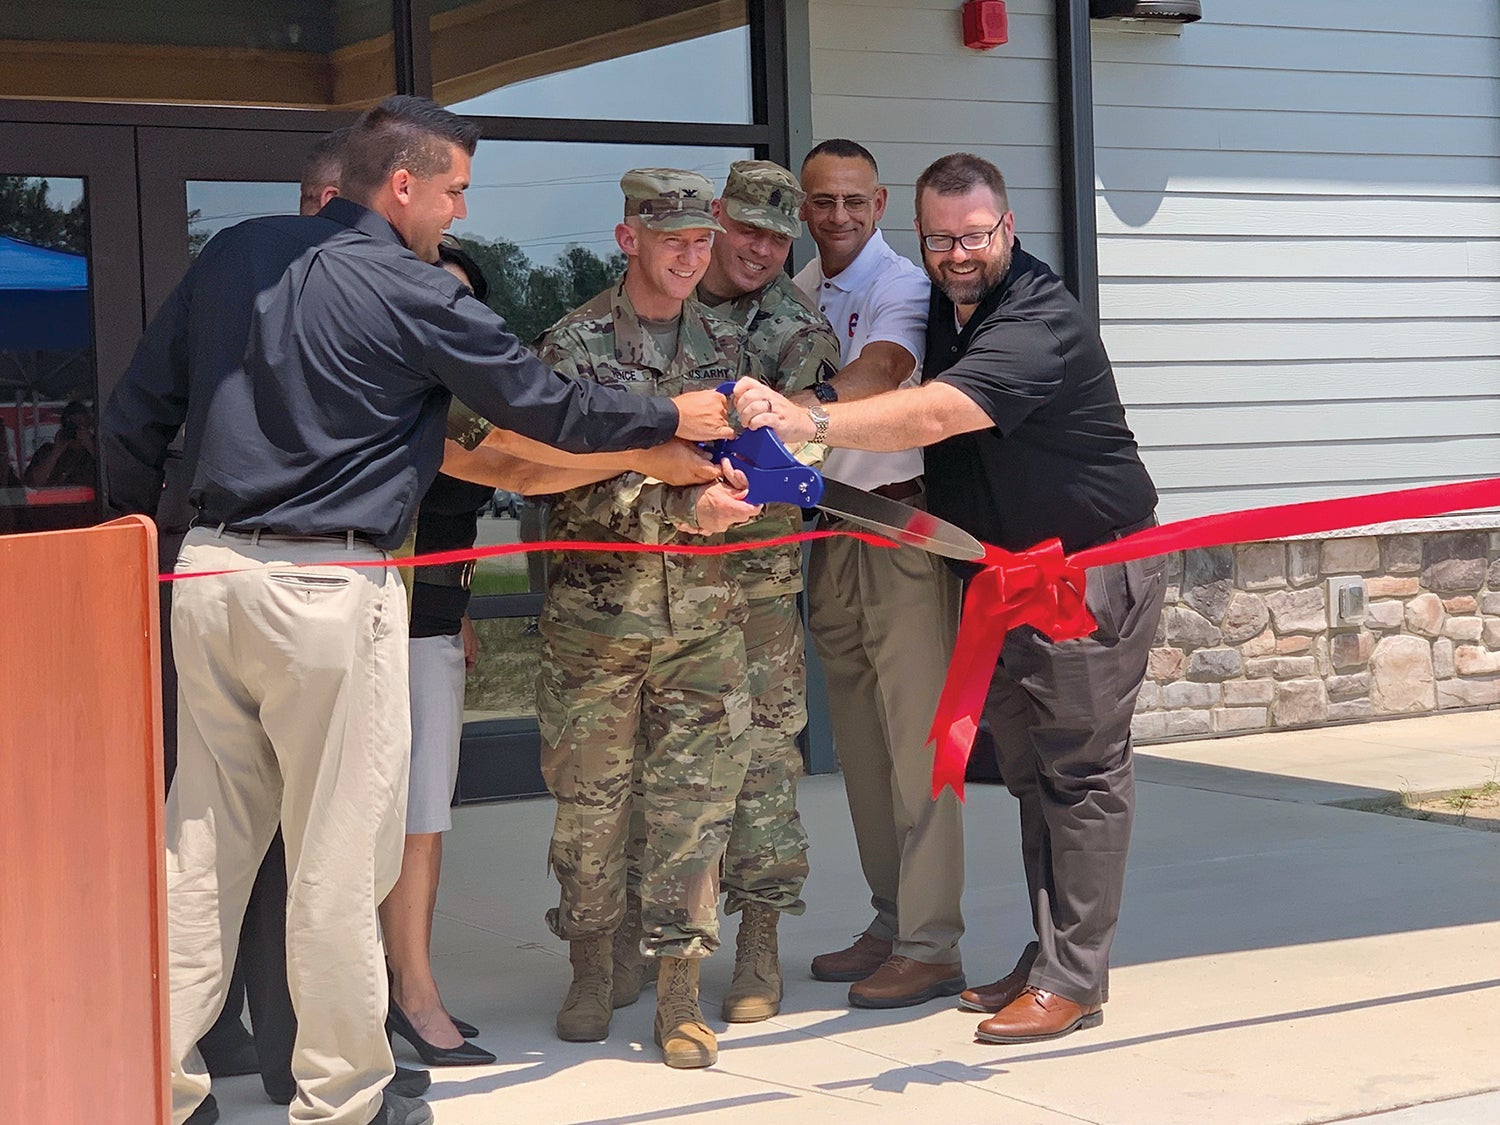 Fort Bragg garrison commander Col. Scott Pence, in uniform on left, and other leaders cut a ribbon to open the post’s Smith Lake Outdoor Recreation Center. (Credit: U.S. Army/Elvia Kelly)